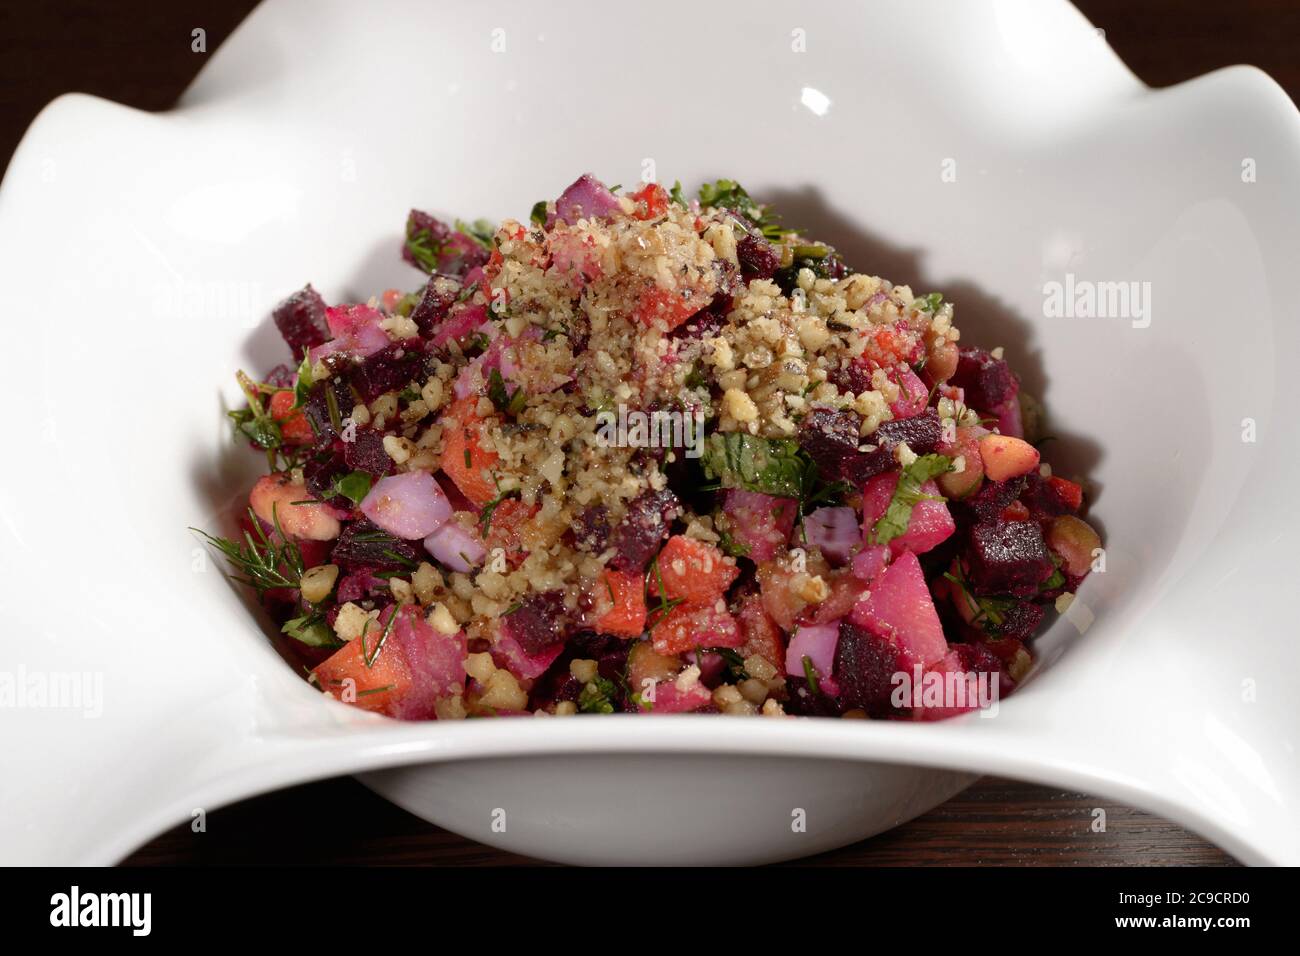 Vegetarian salad served in a restaurant with vegetables vinaigrette, close-up. Photos for restaurant and cafe menus Stock Photo